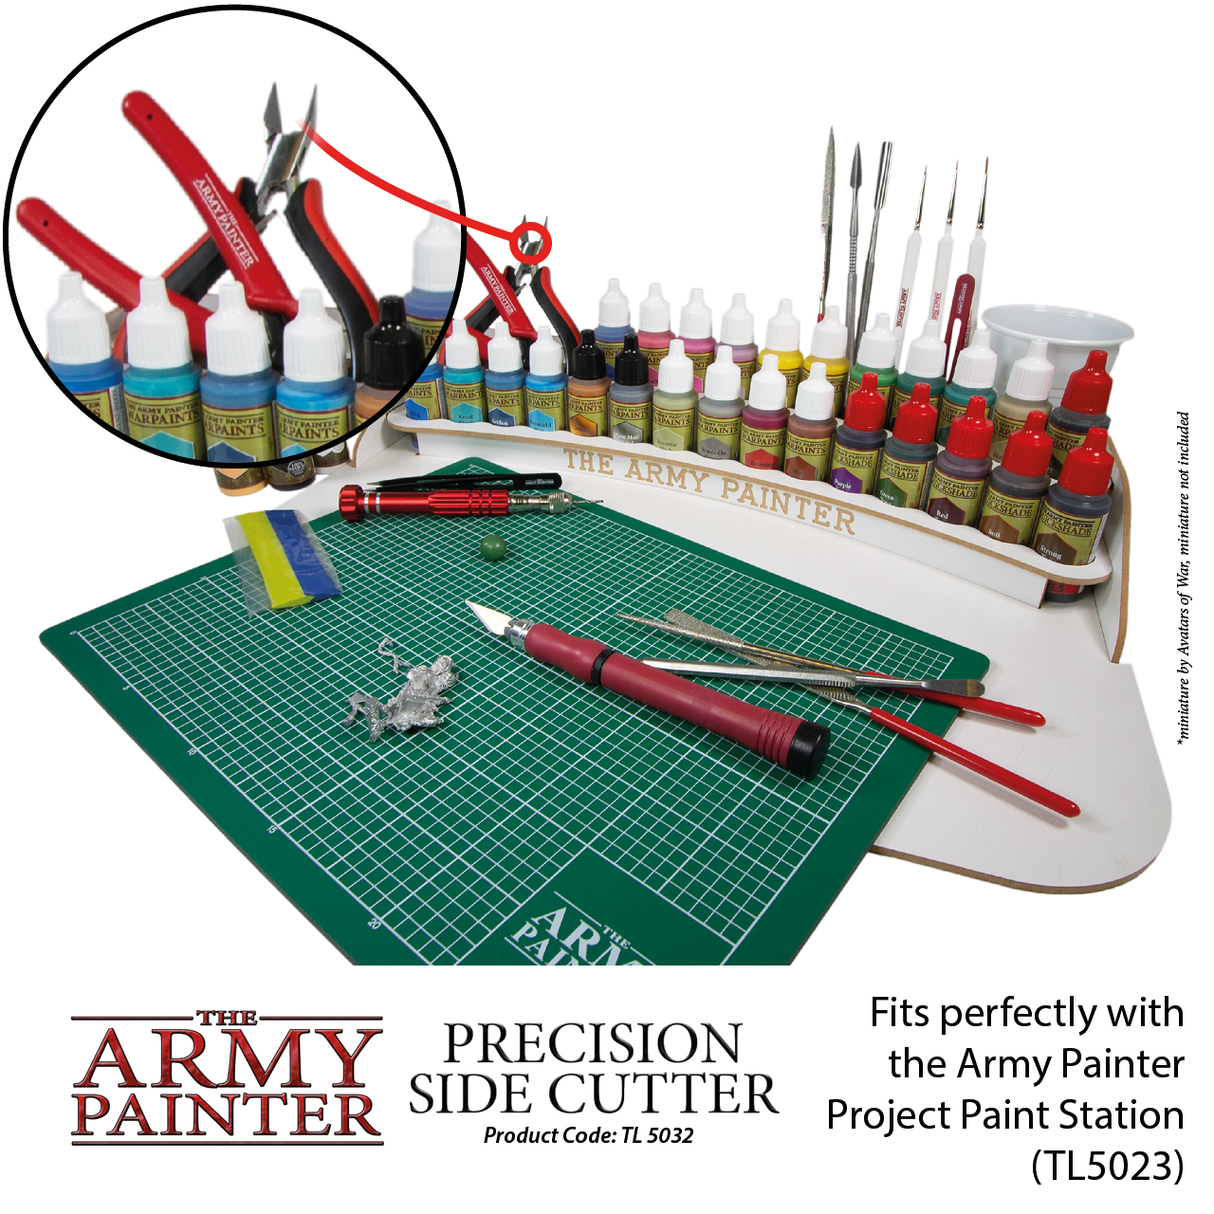 Army Painter Precision Side Cutter